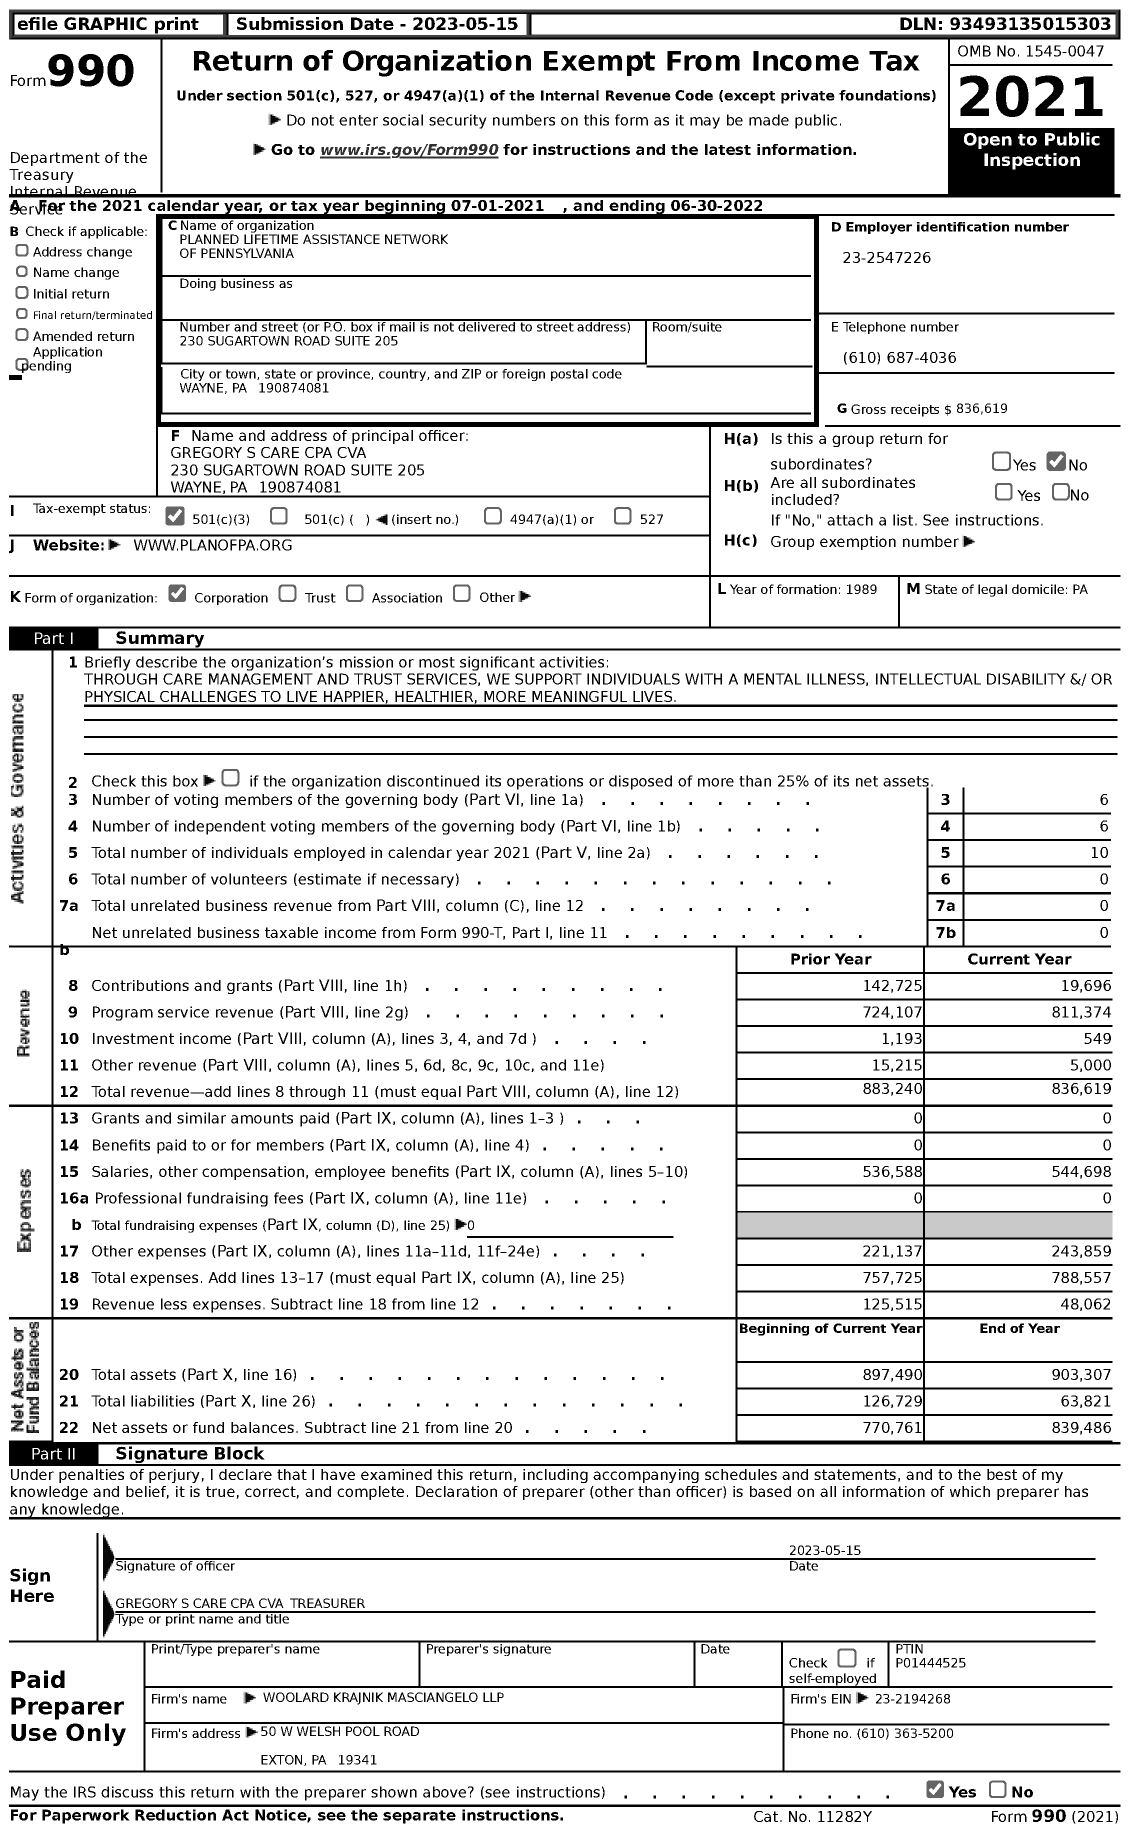 Image of first page of 2021 Form 990 for Planned Lifetime Assistance Network of Pennsylvania